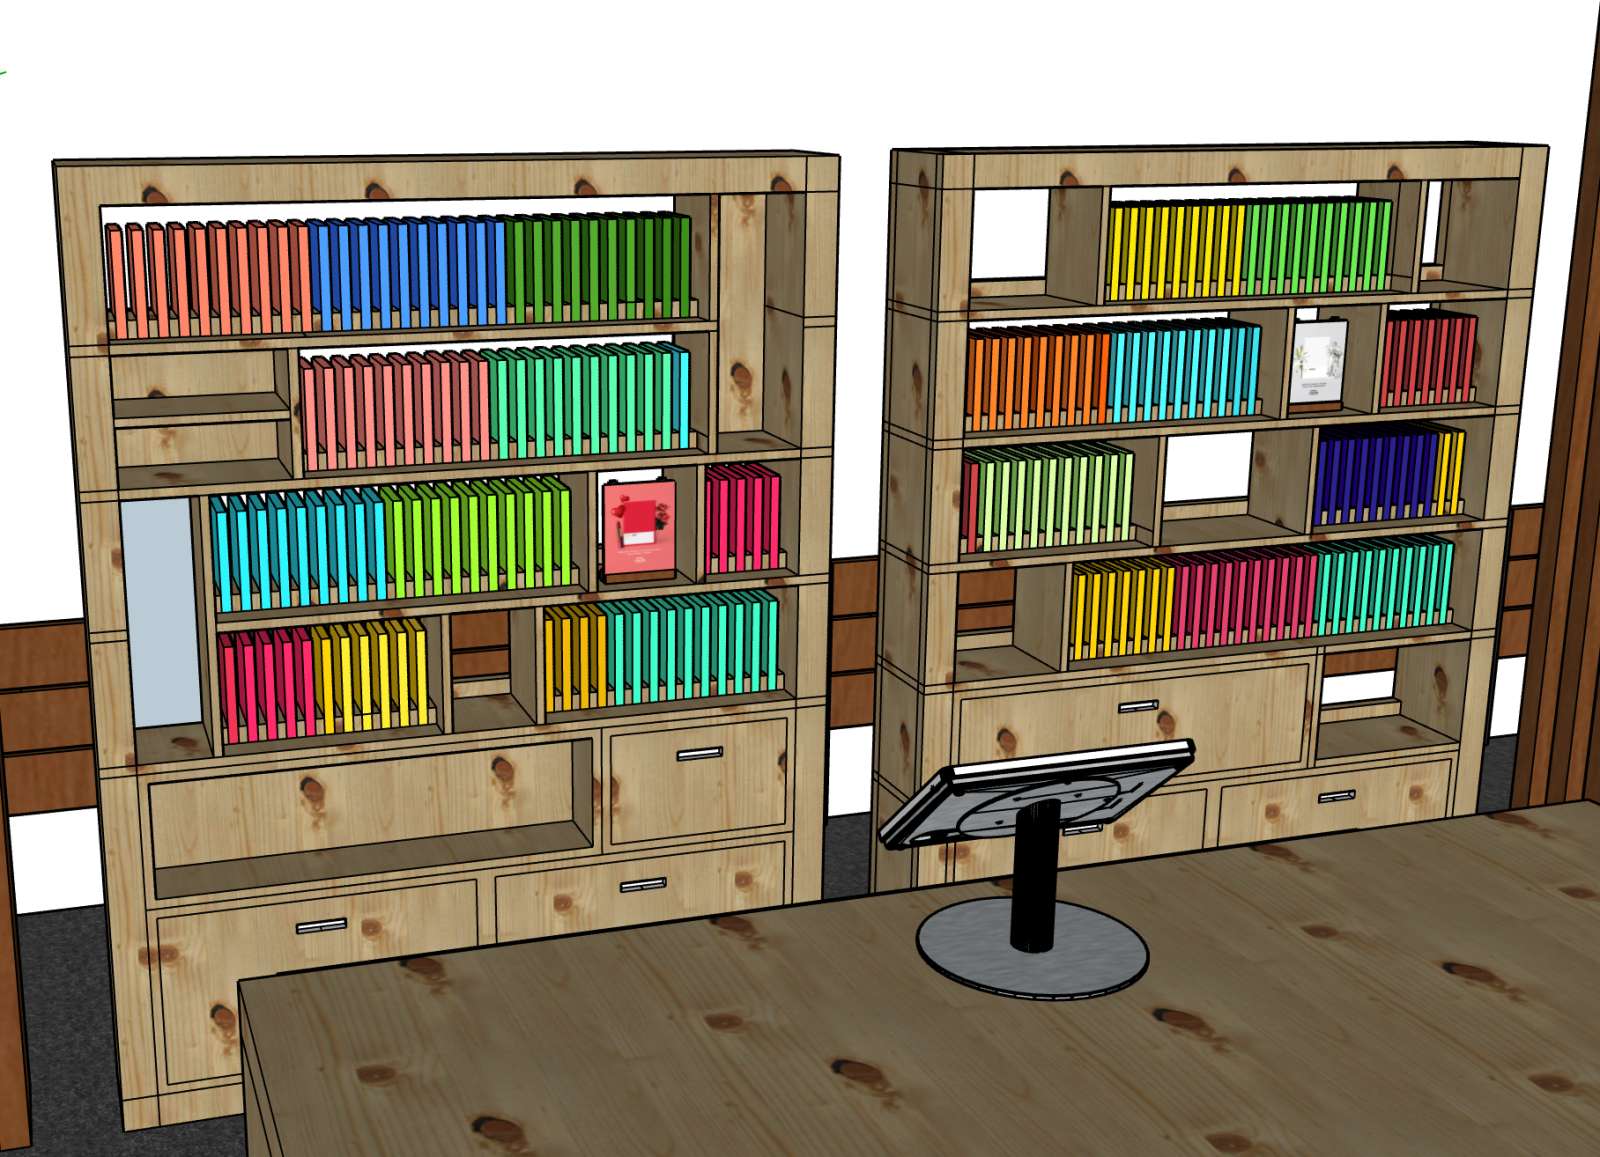 Invitation to Worldbex 2022: The Boysen Color Library Booth